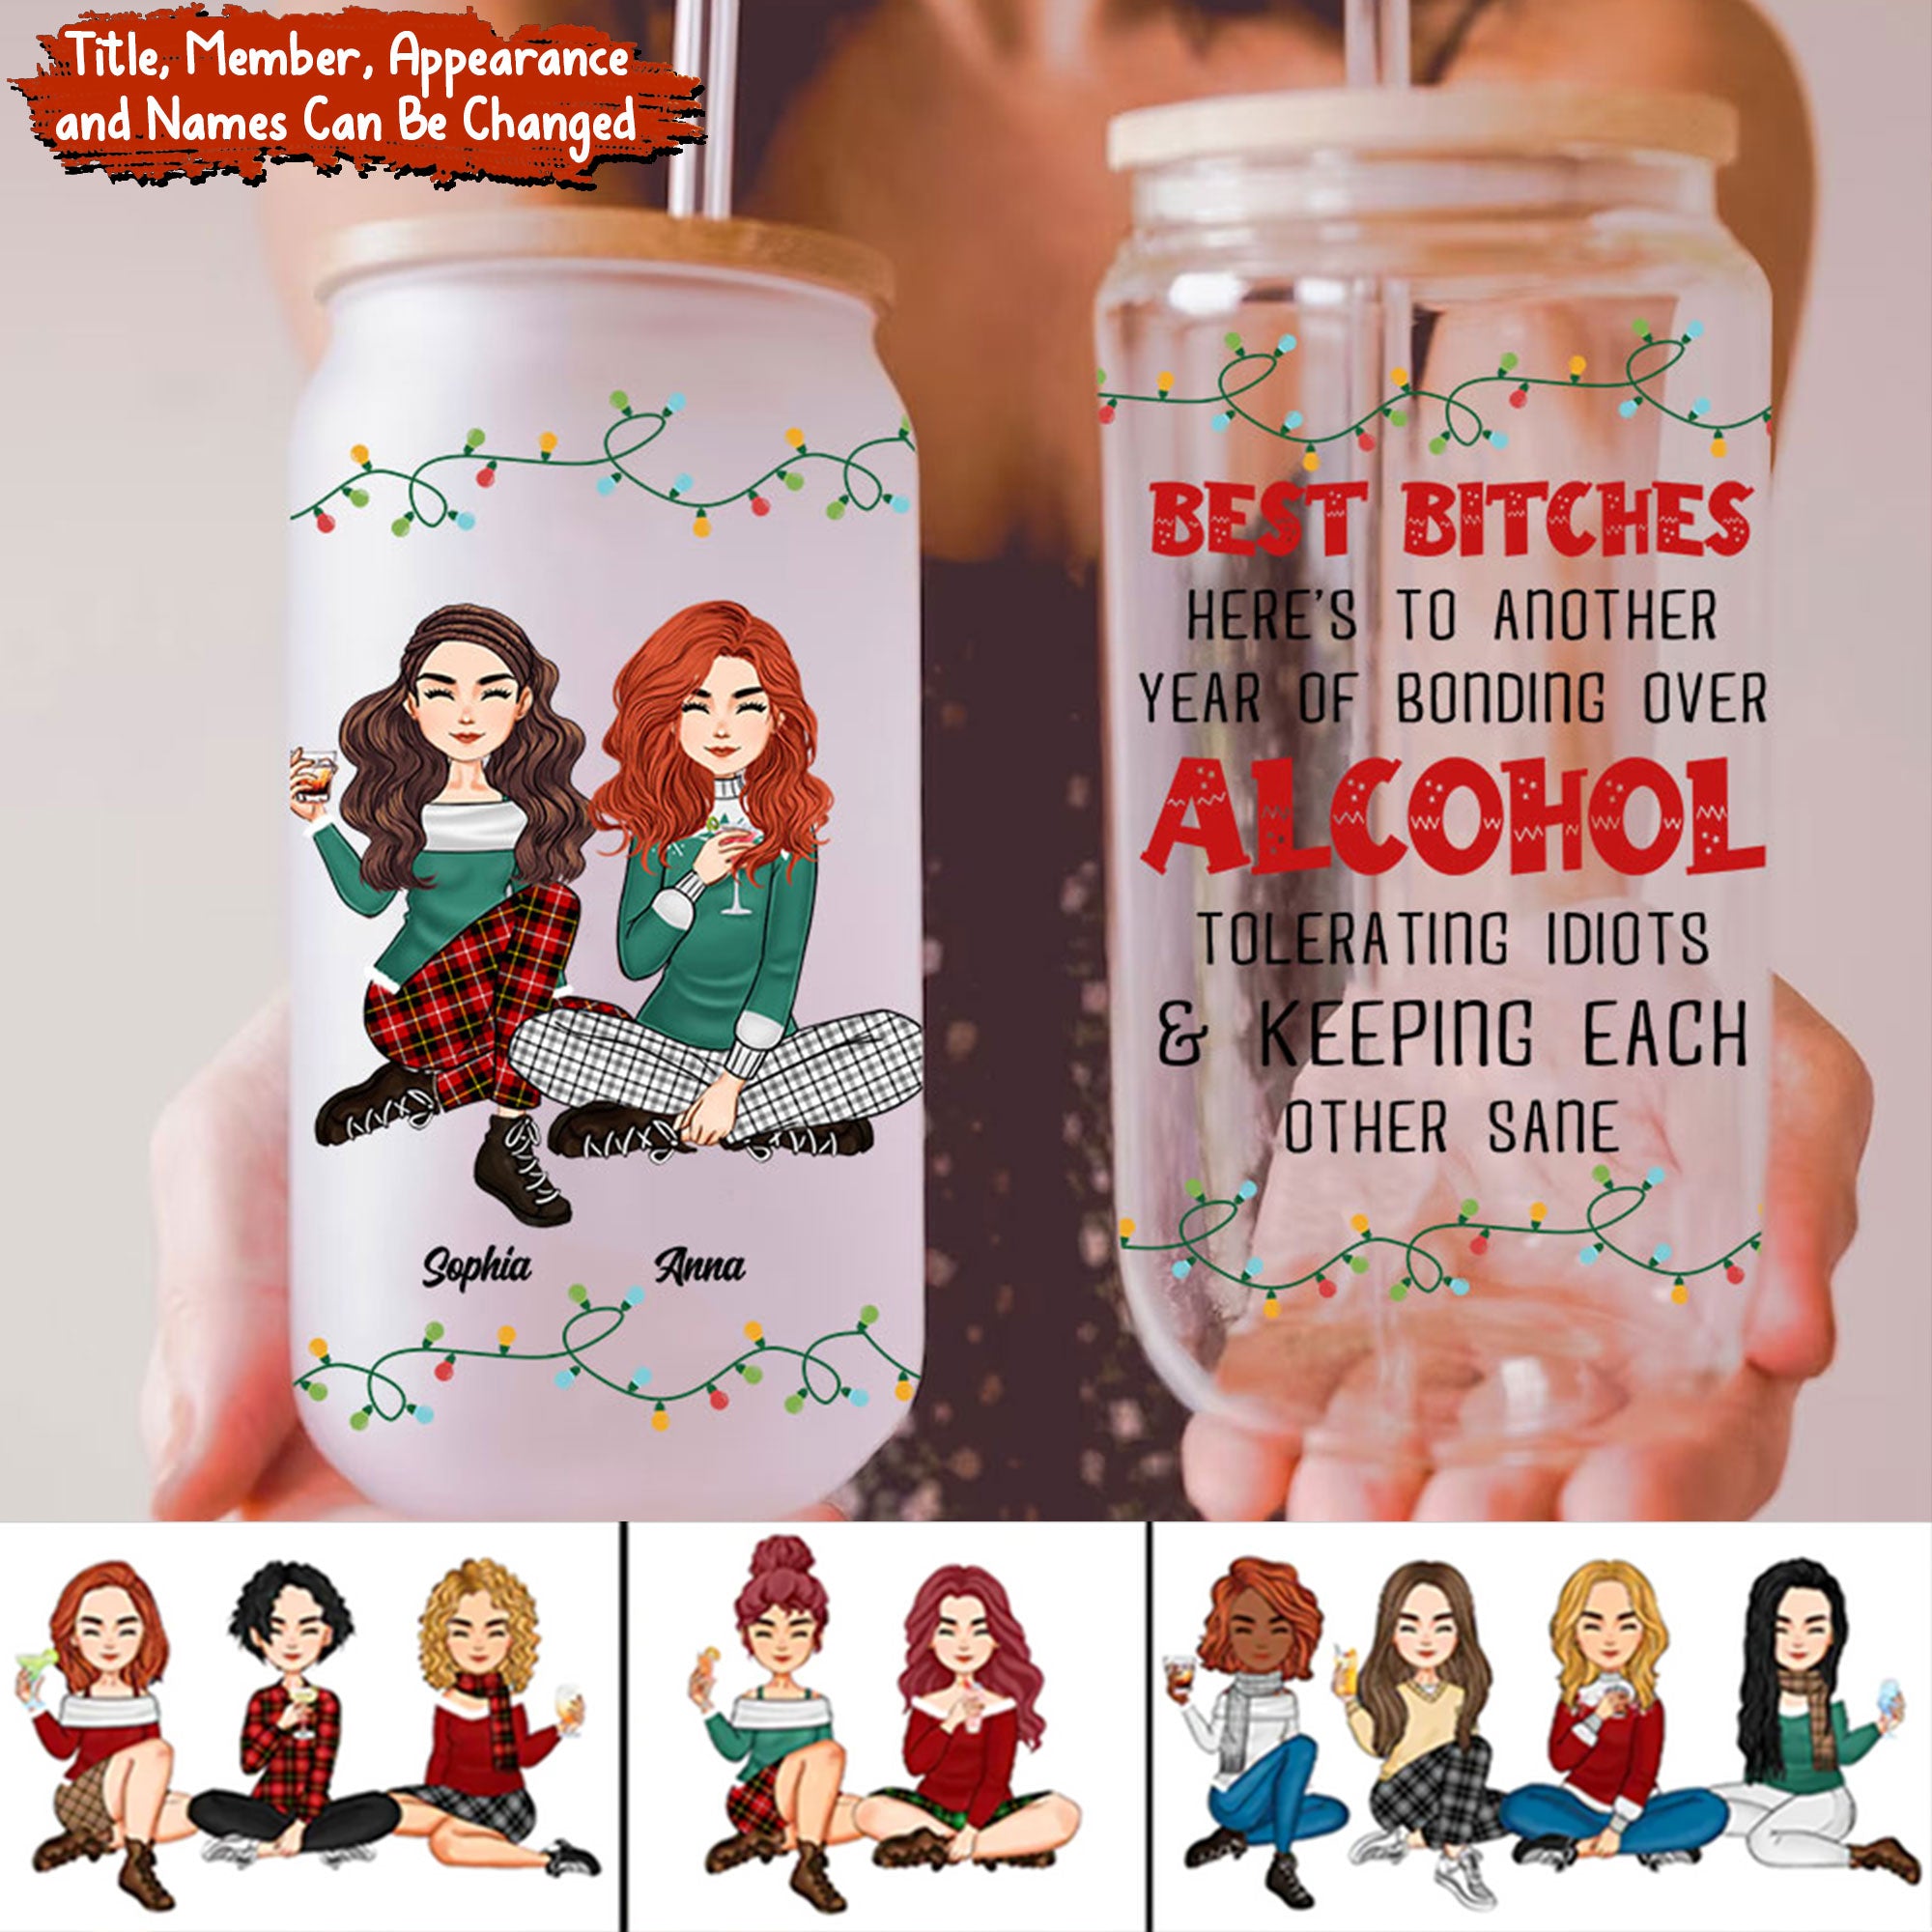 Novelty Gifts For Her - Personalized Glass Bottle, Frosted Bottle - Custom Appearances And Names